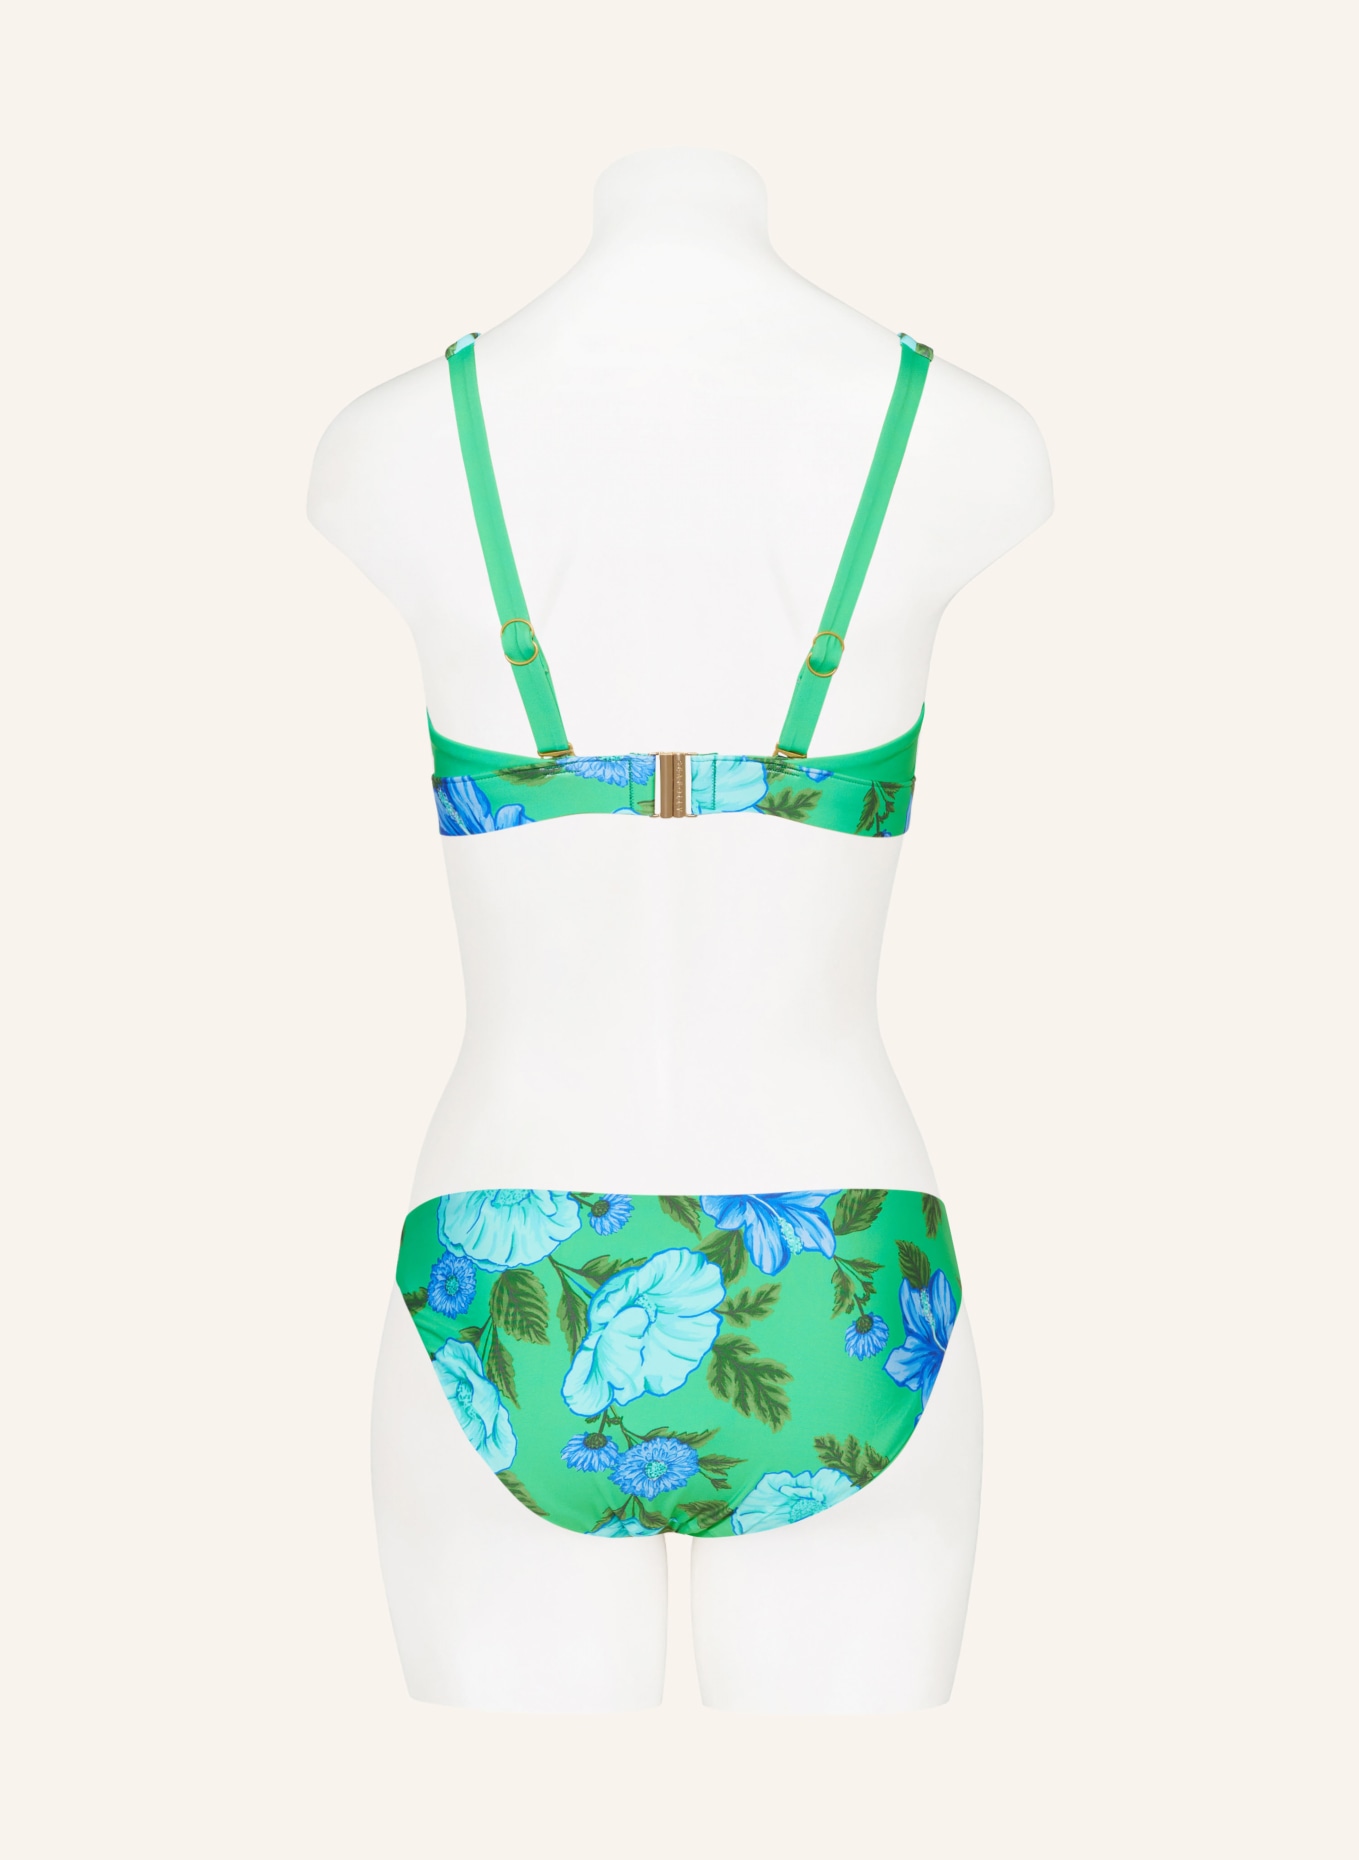 SEAFOLLY Bralette bikini top GARDEN PARTY, Color: LIGHT GREEN/ TURQUOISE/ BLUE (Image 3)